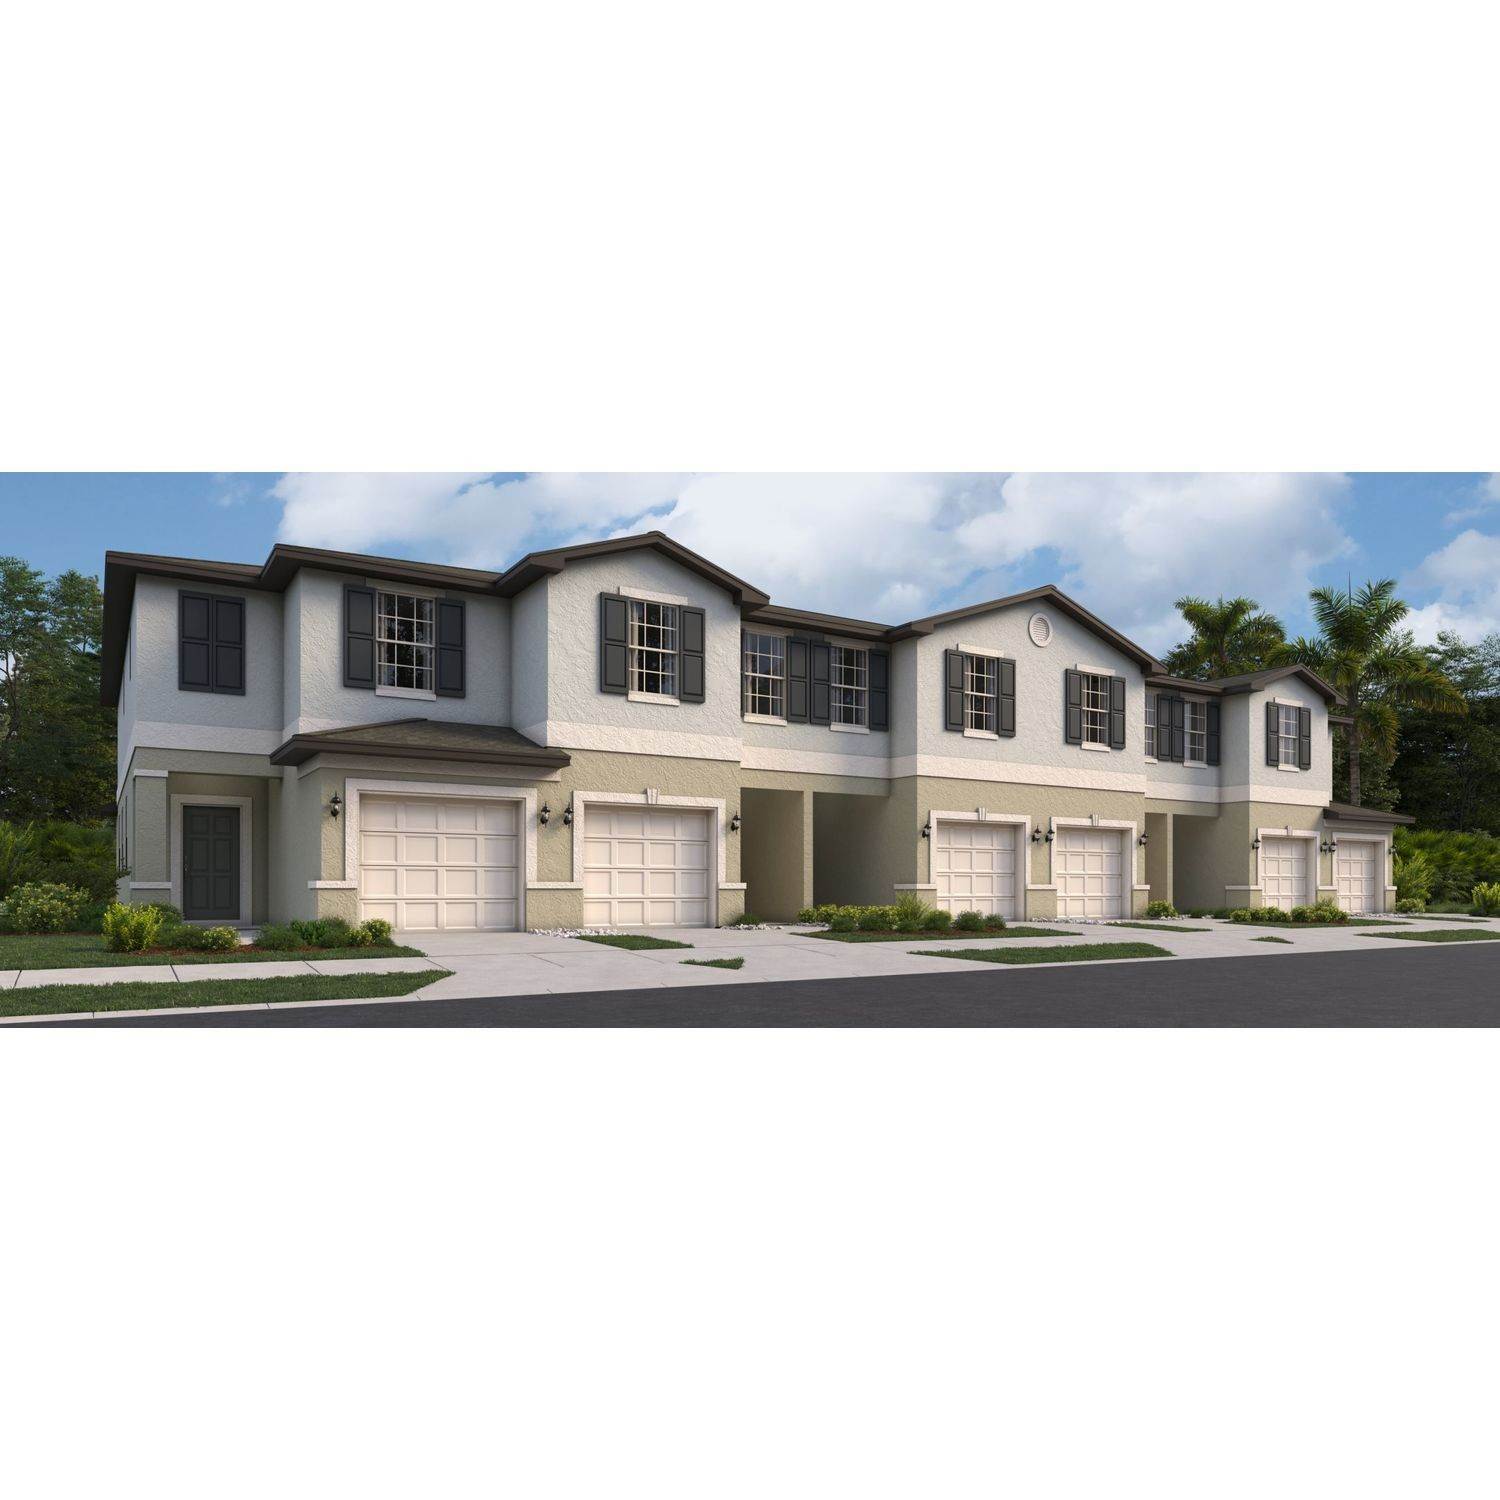 2. Angeline - The Townhomes byggnad vid 17516 Nectar Flume Drive, Land O' Lakes, FL 34638